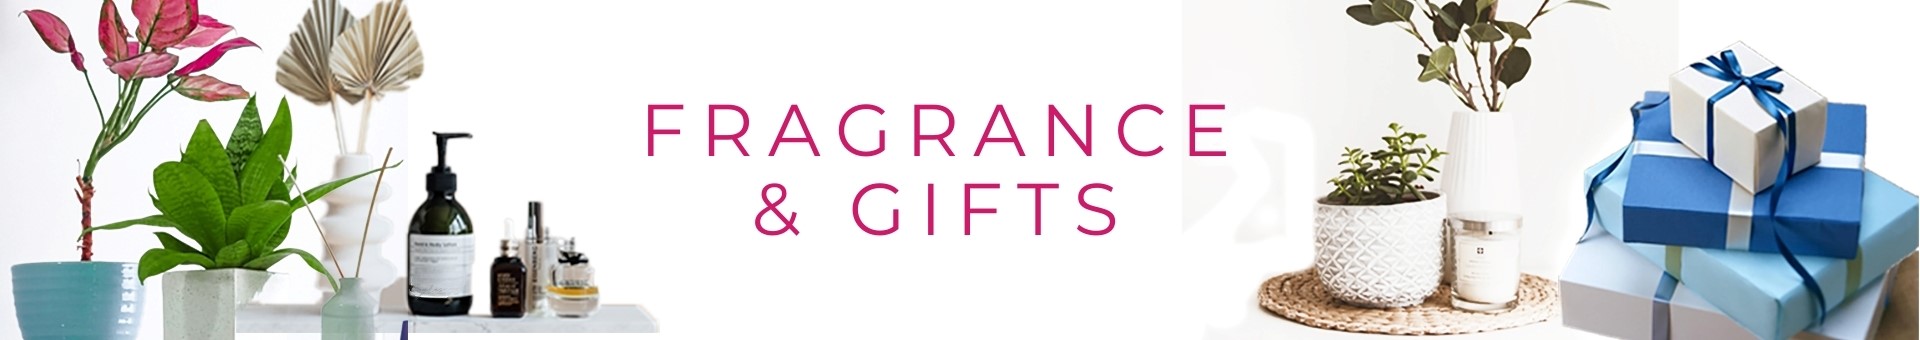 Fragrance & Gifts